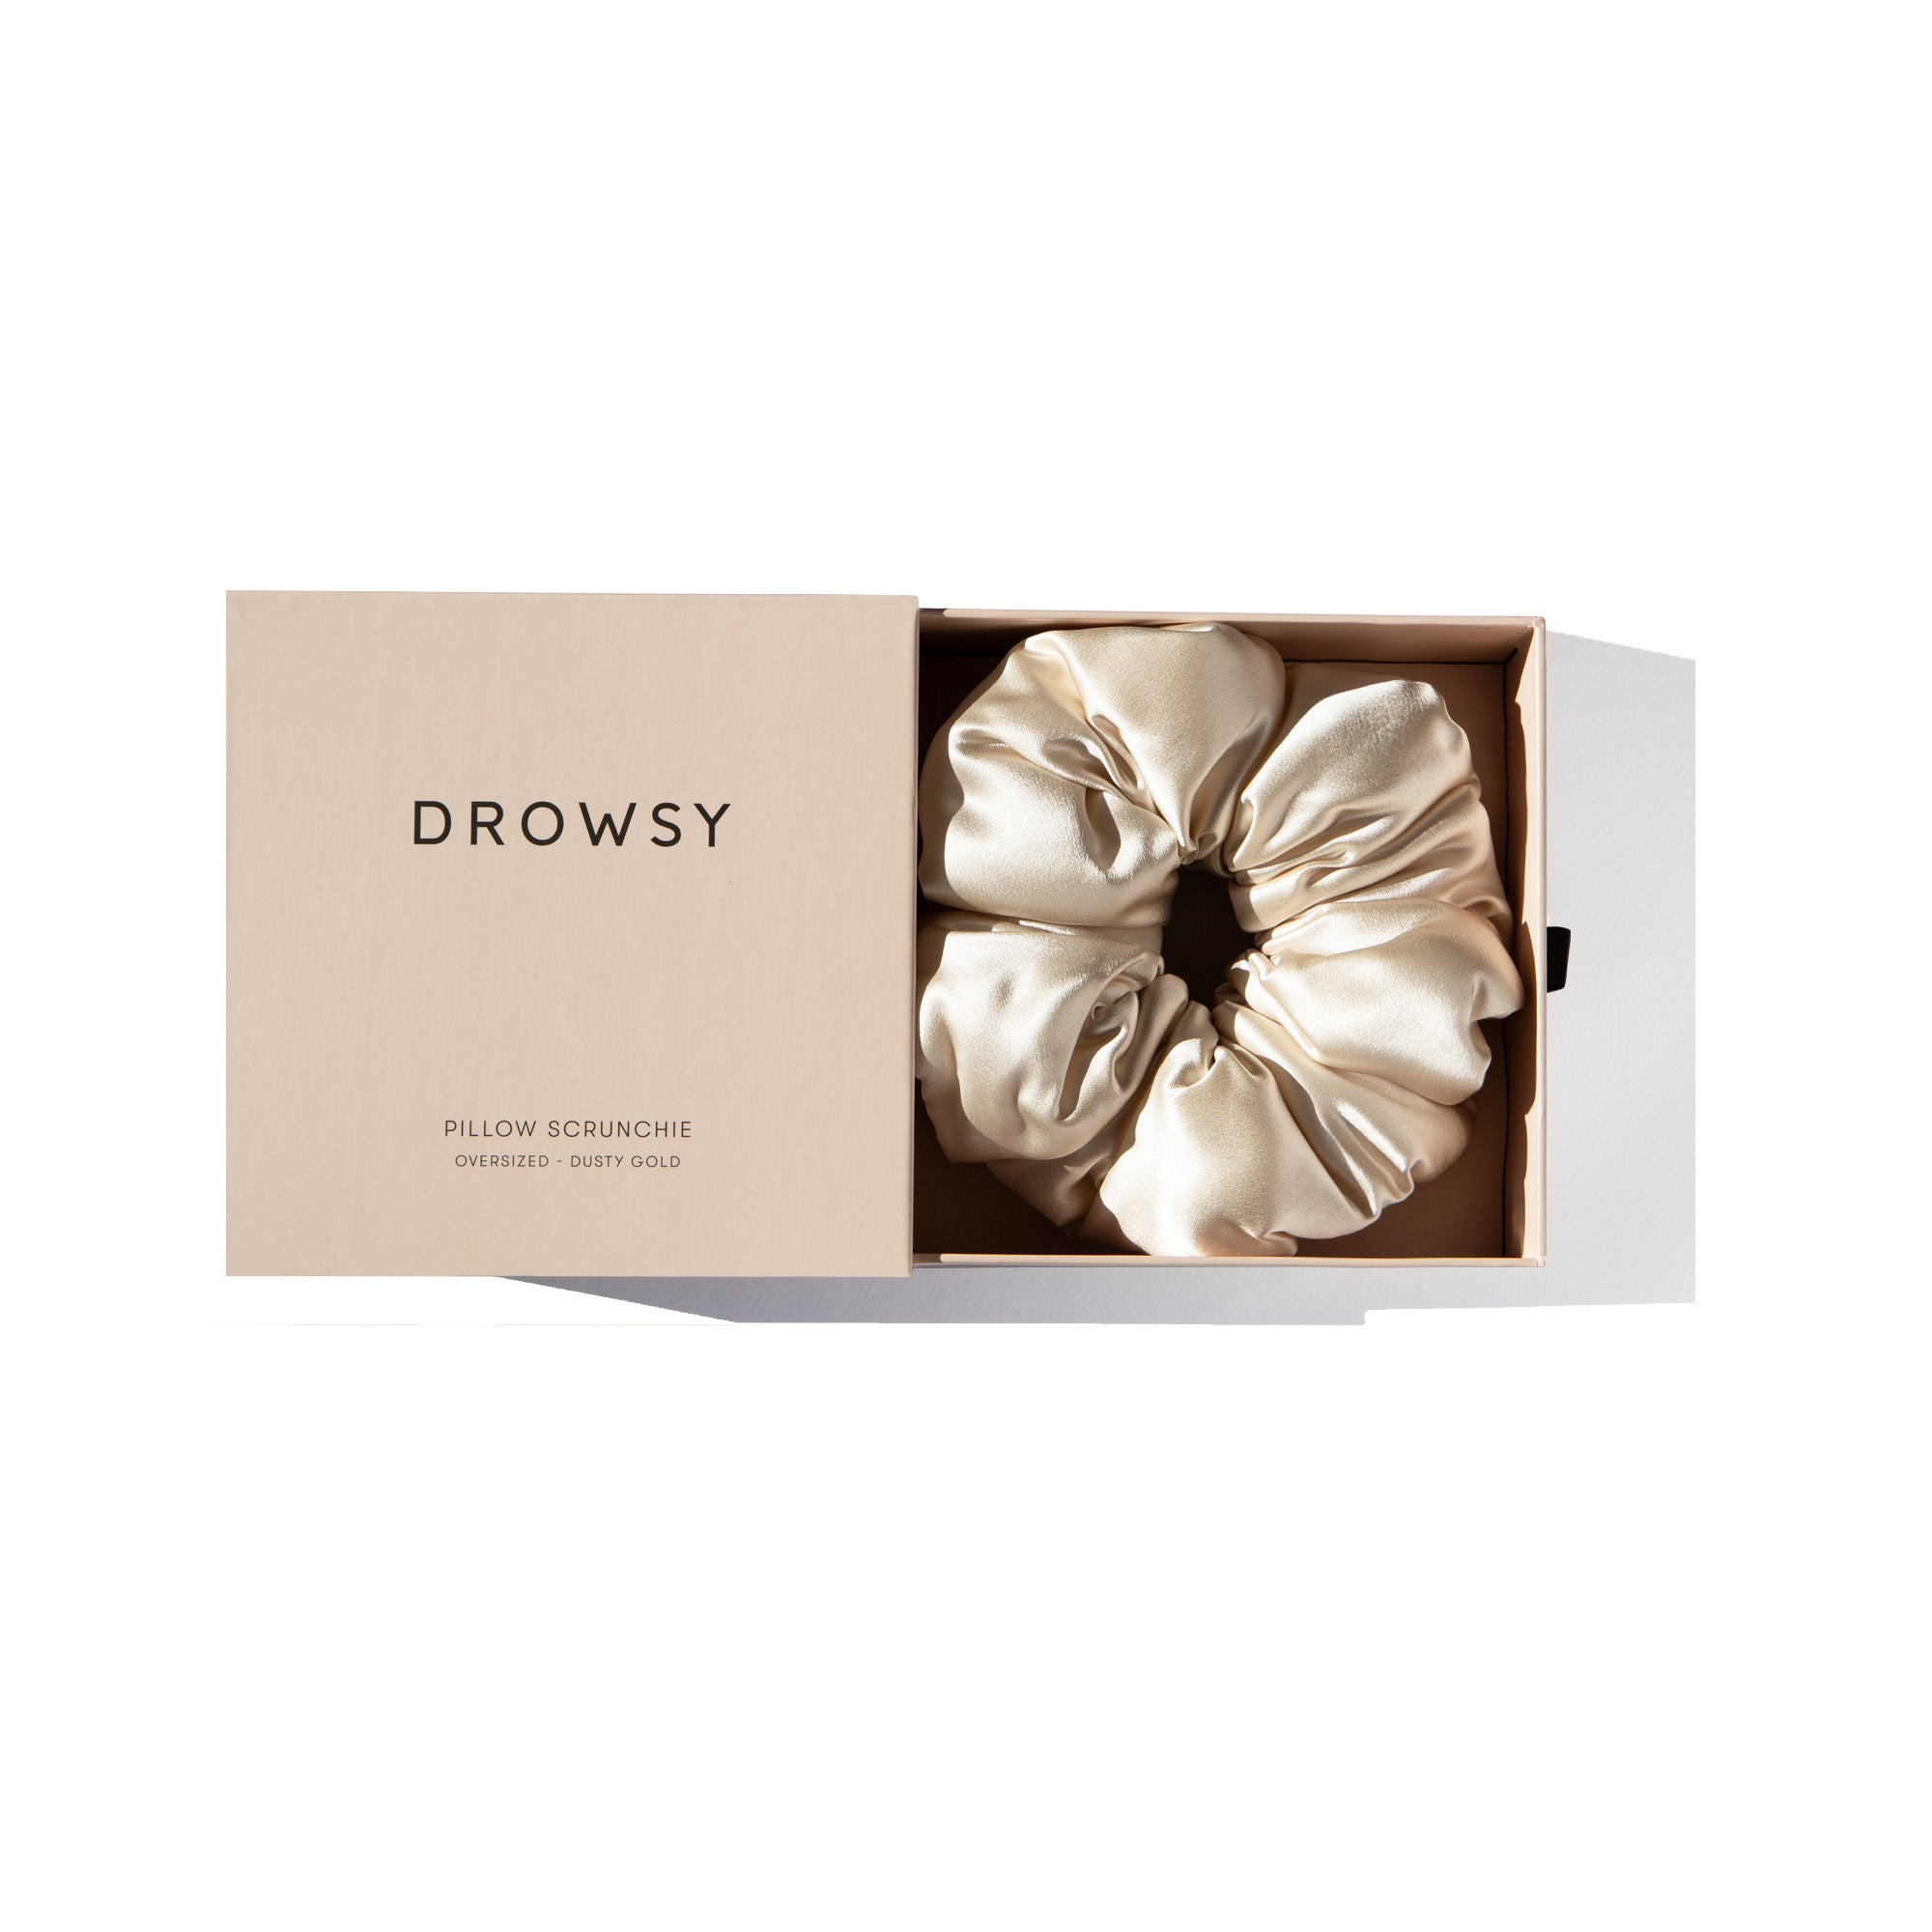 Drowsy Dusty Gold Pillow Scrunchie in its box on a white background